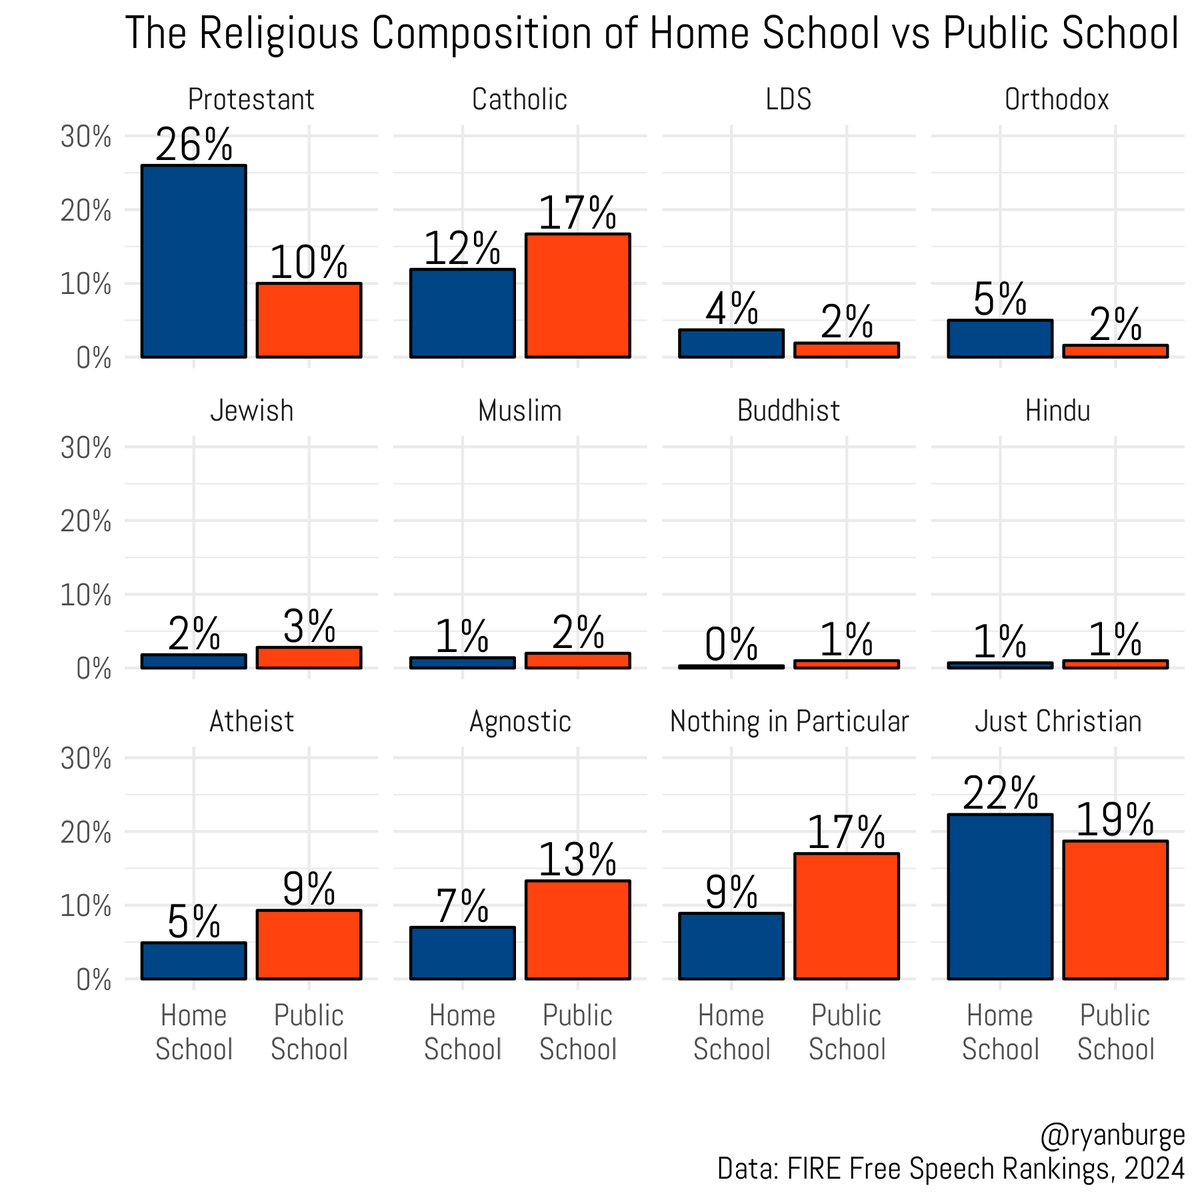 Among college students who were homeschooled: 62% were raised Christian. 21% were raised with no religion. Among college students who went to public school: 48% were raised Christian. 39% were raised with no religion.